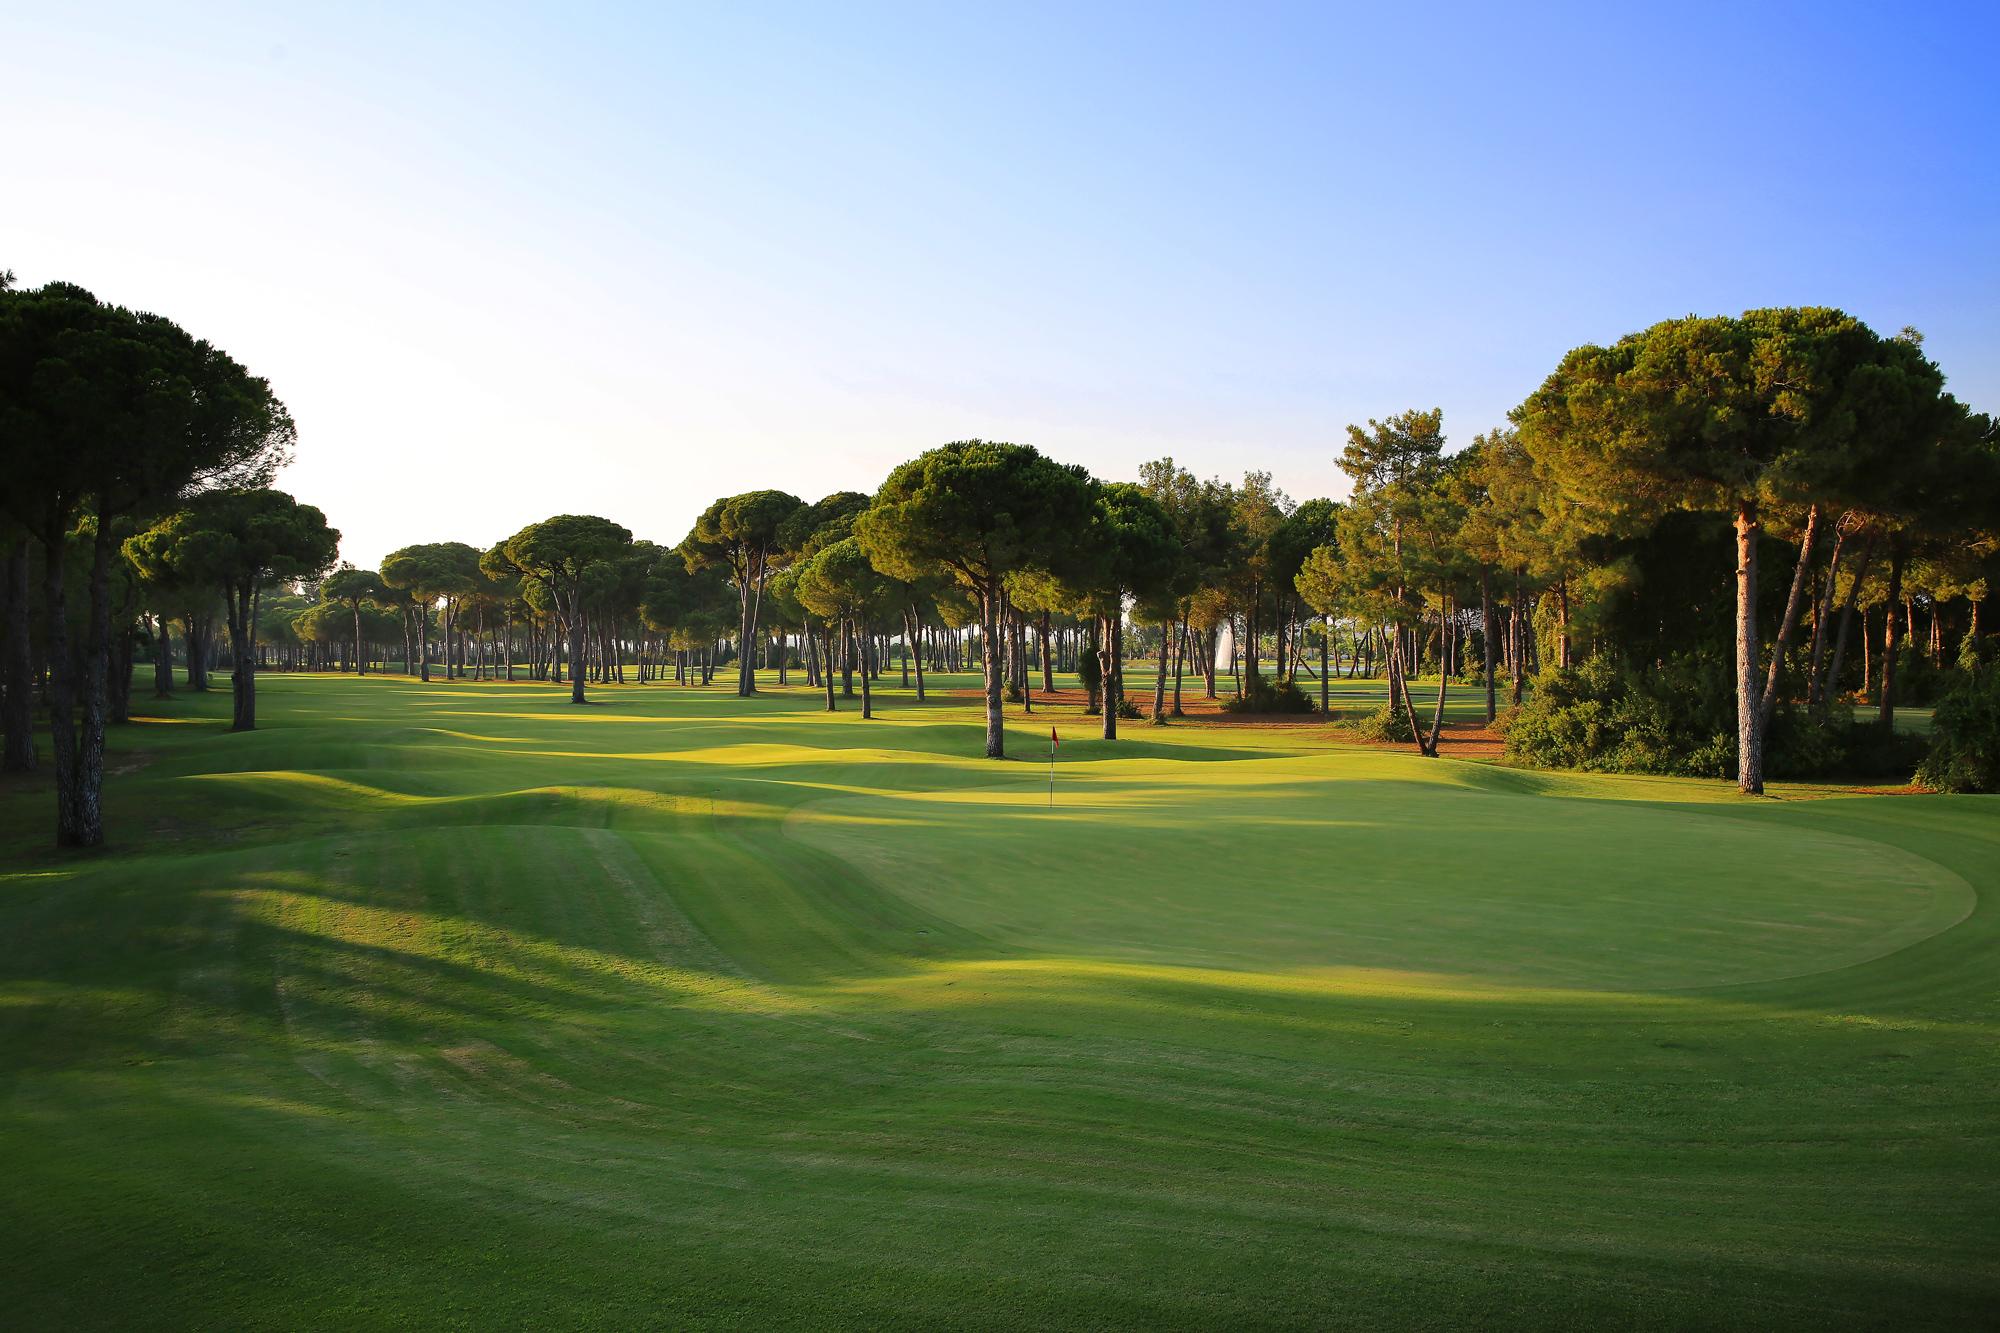 Gloria Old Golf Course carries several of the finest golf course near Belek